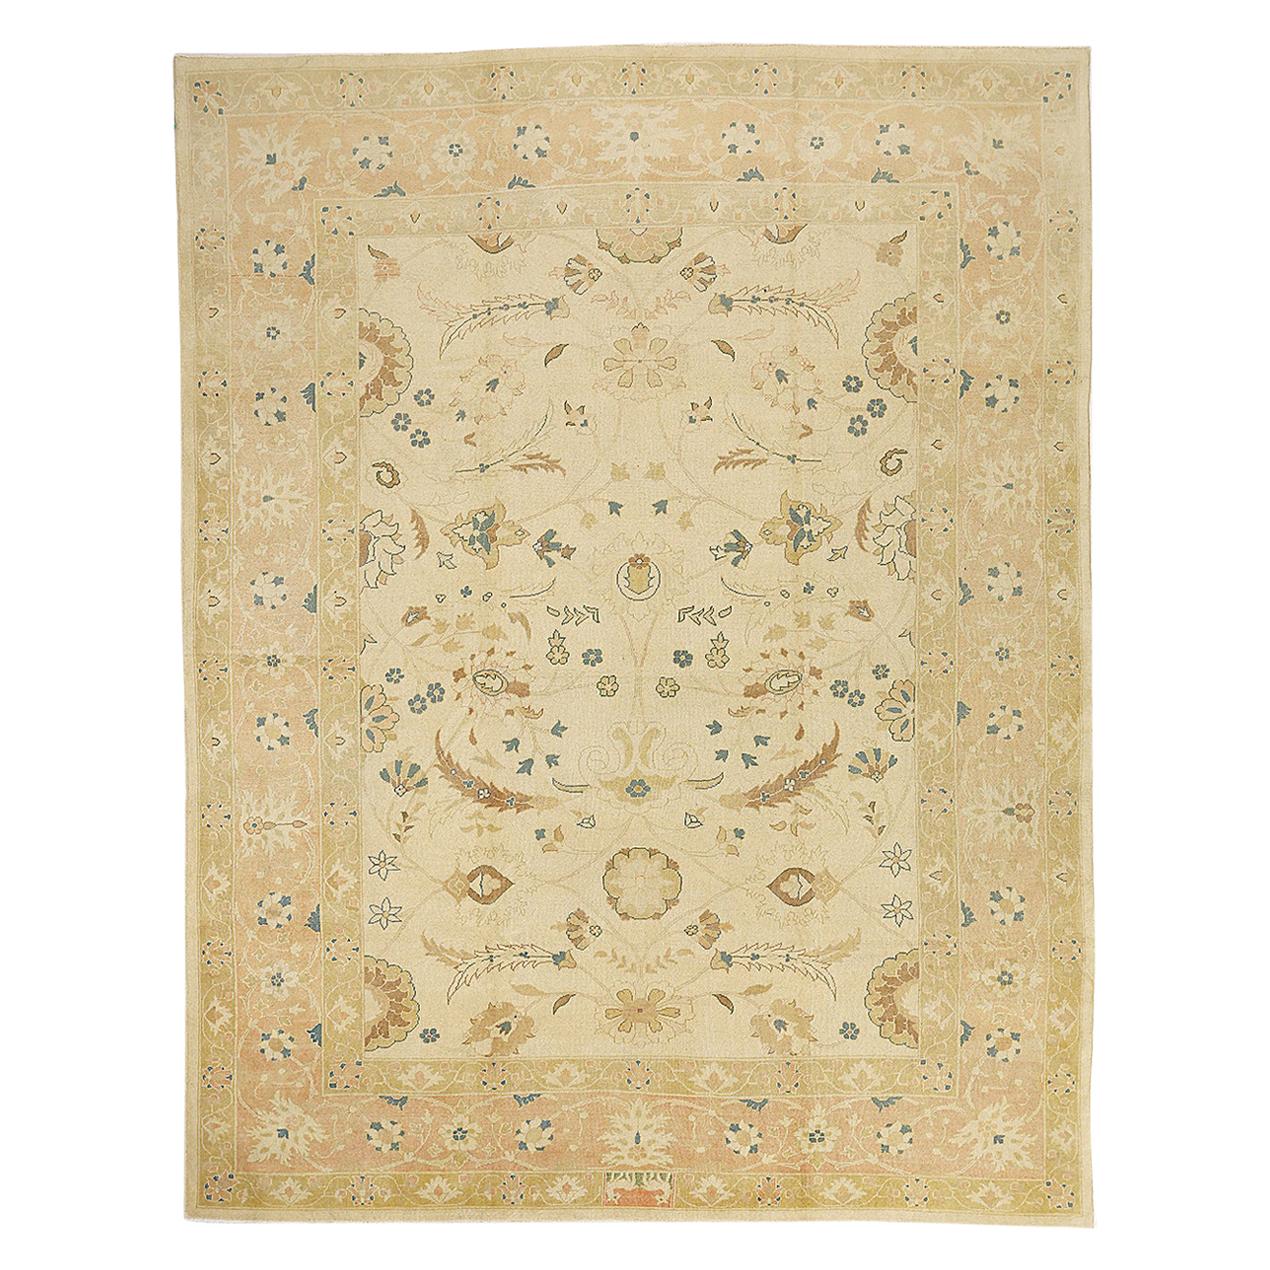 New handmade Persian area rug from high-quality sheep’s wool and colored with eco-friendly vegetable dyes that are proven safe for humans and pets alike. It’s a traditional Sultanabad design showcasing a regal ivory field with prominent Herati